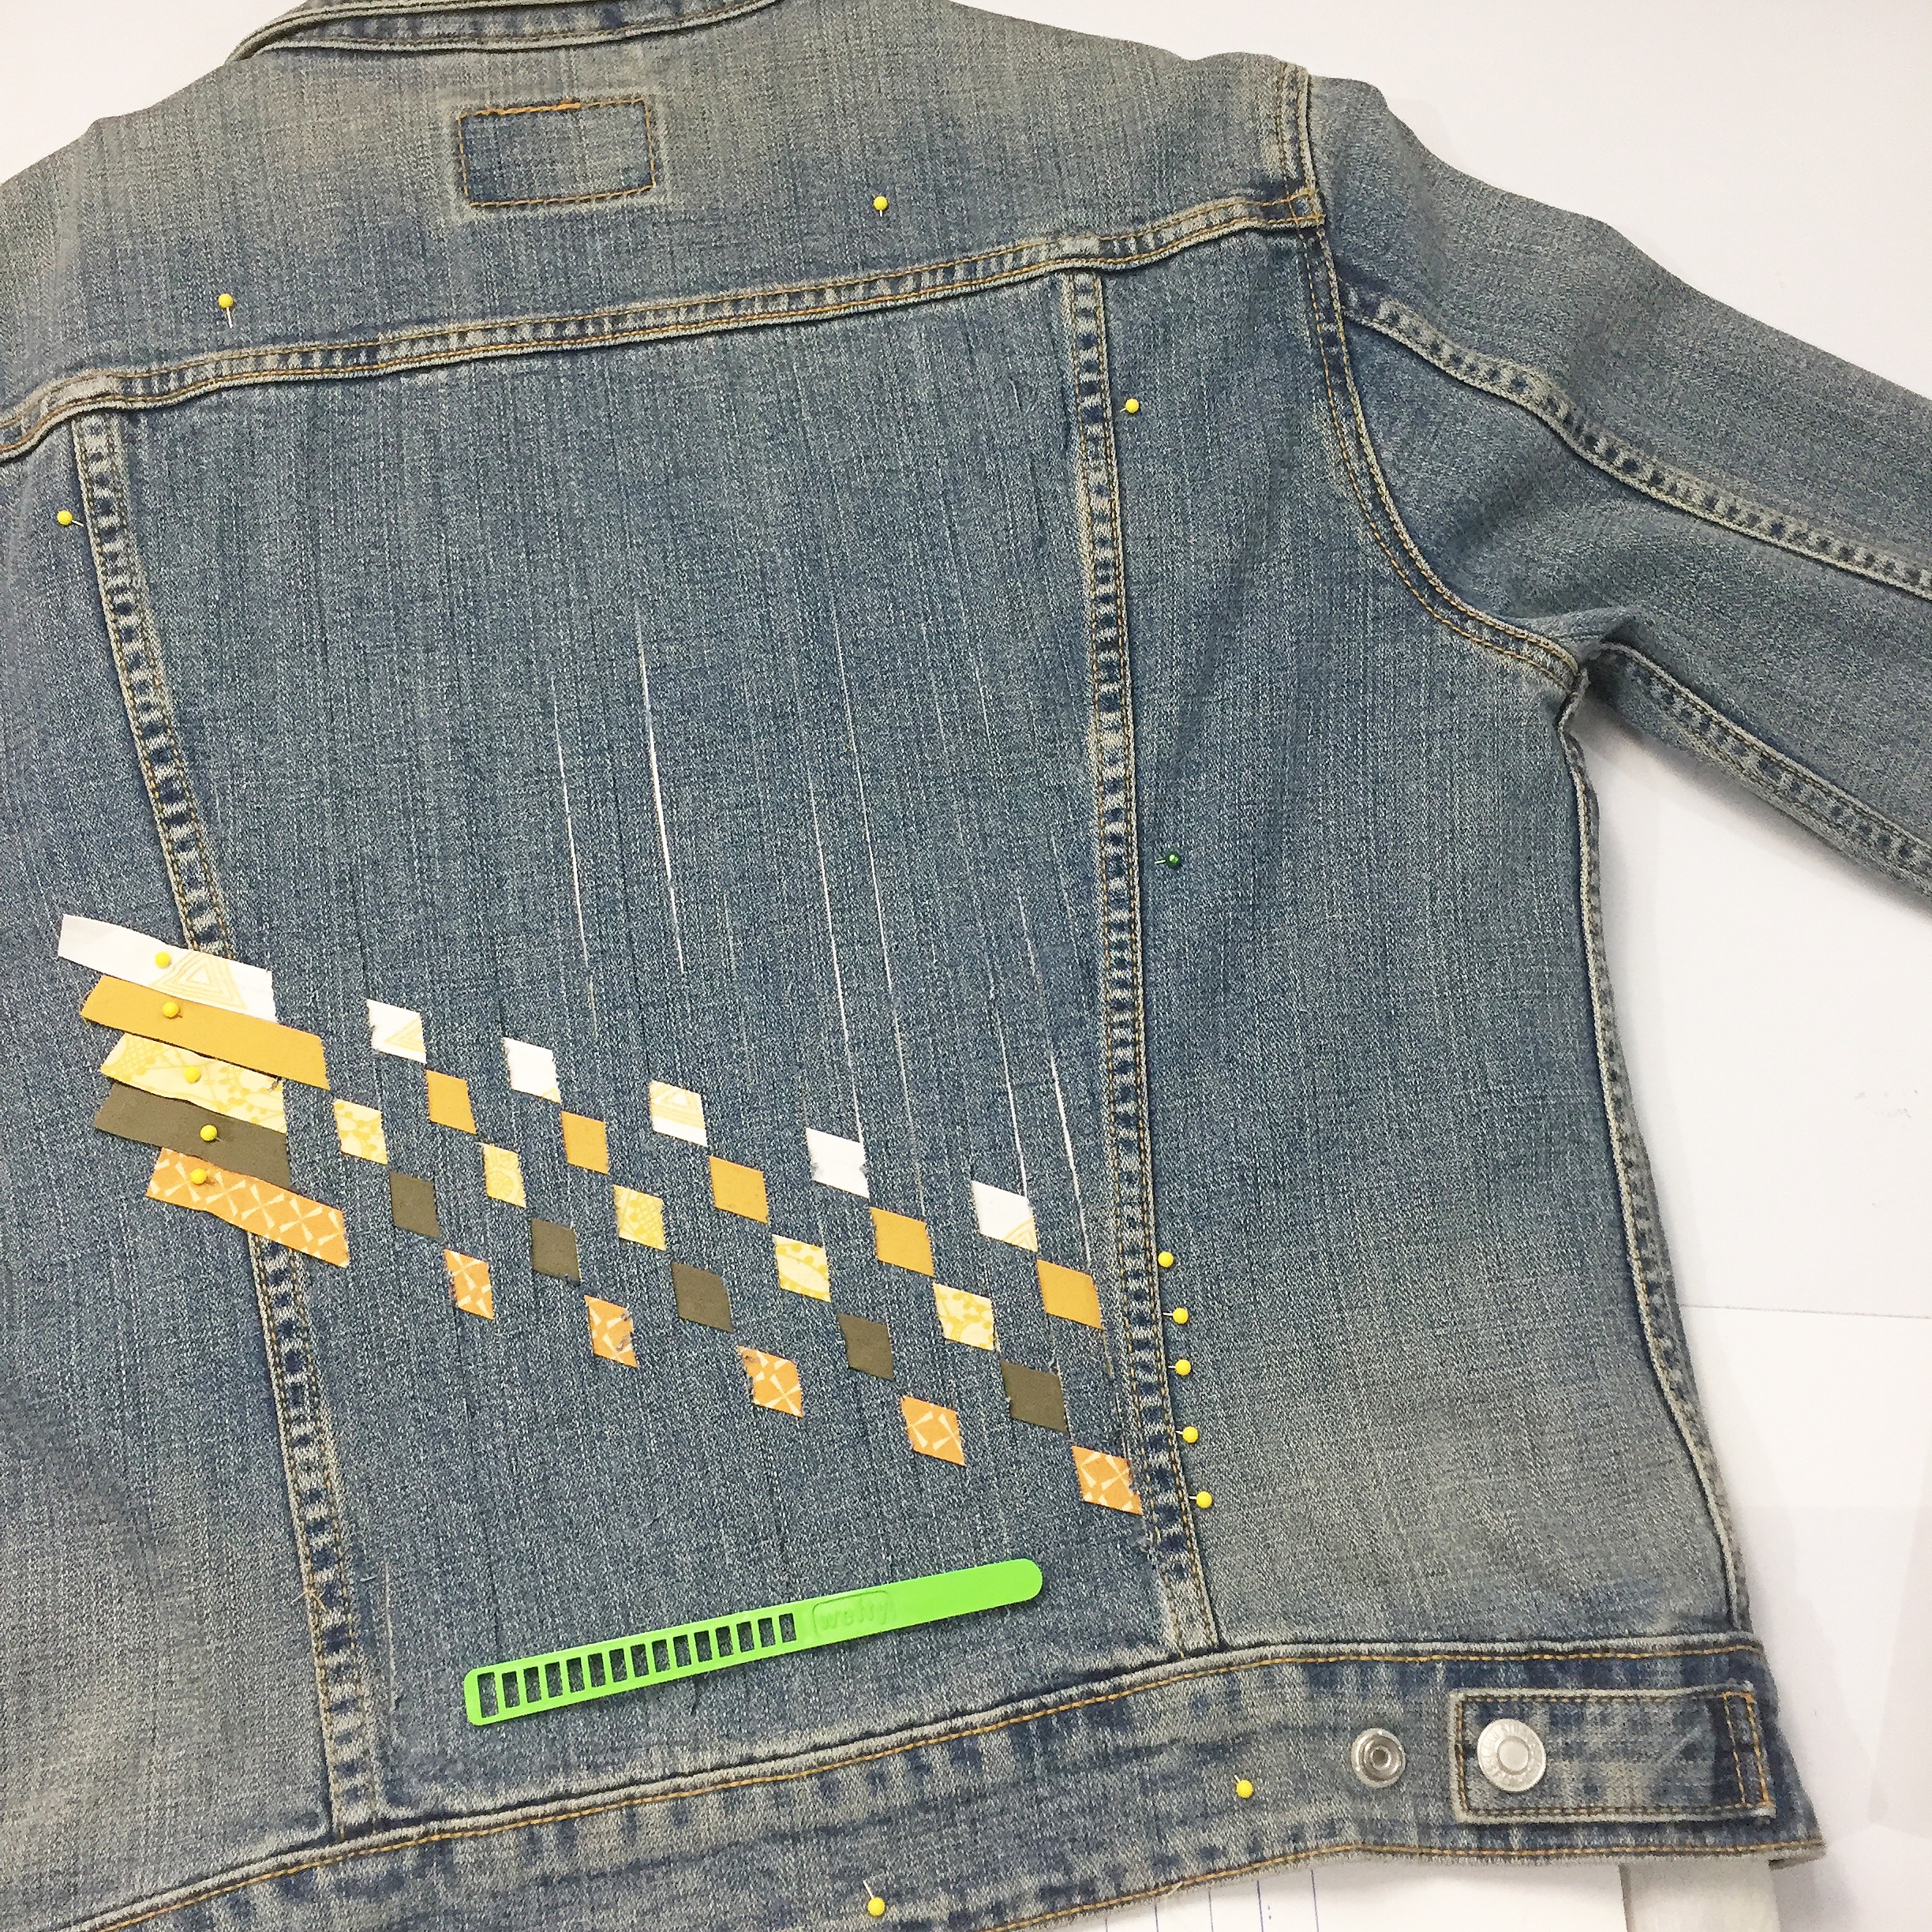 Fabric Weaving: How to Weave Your Jacket! — WEFTY